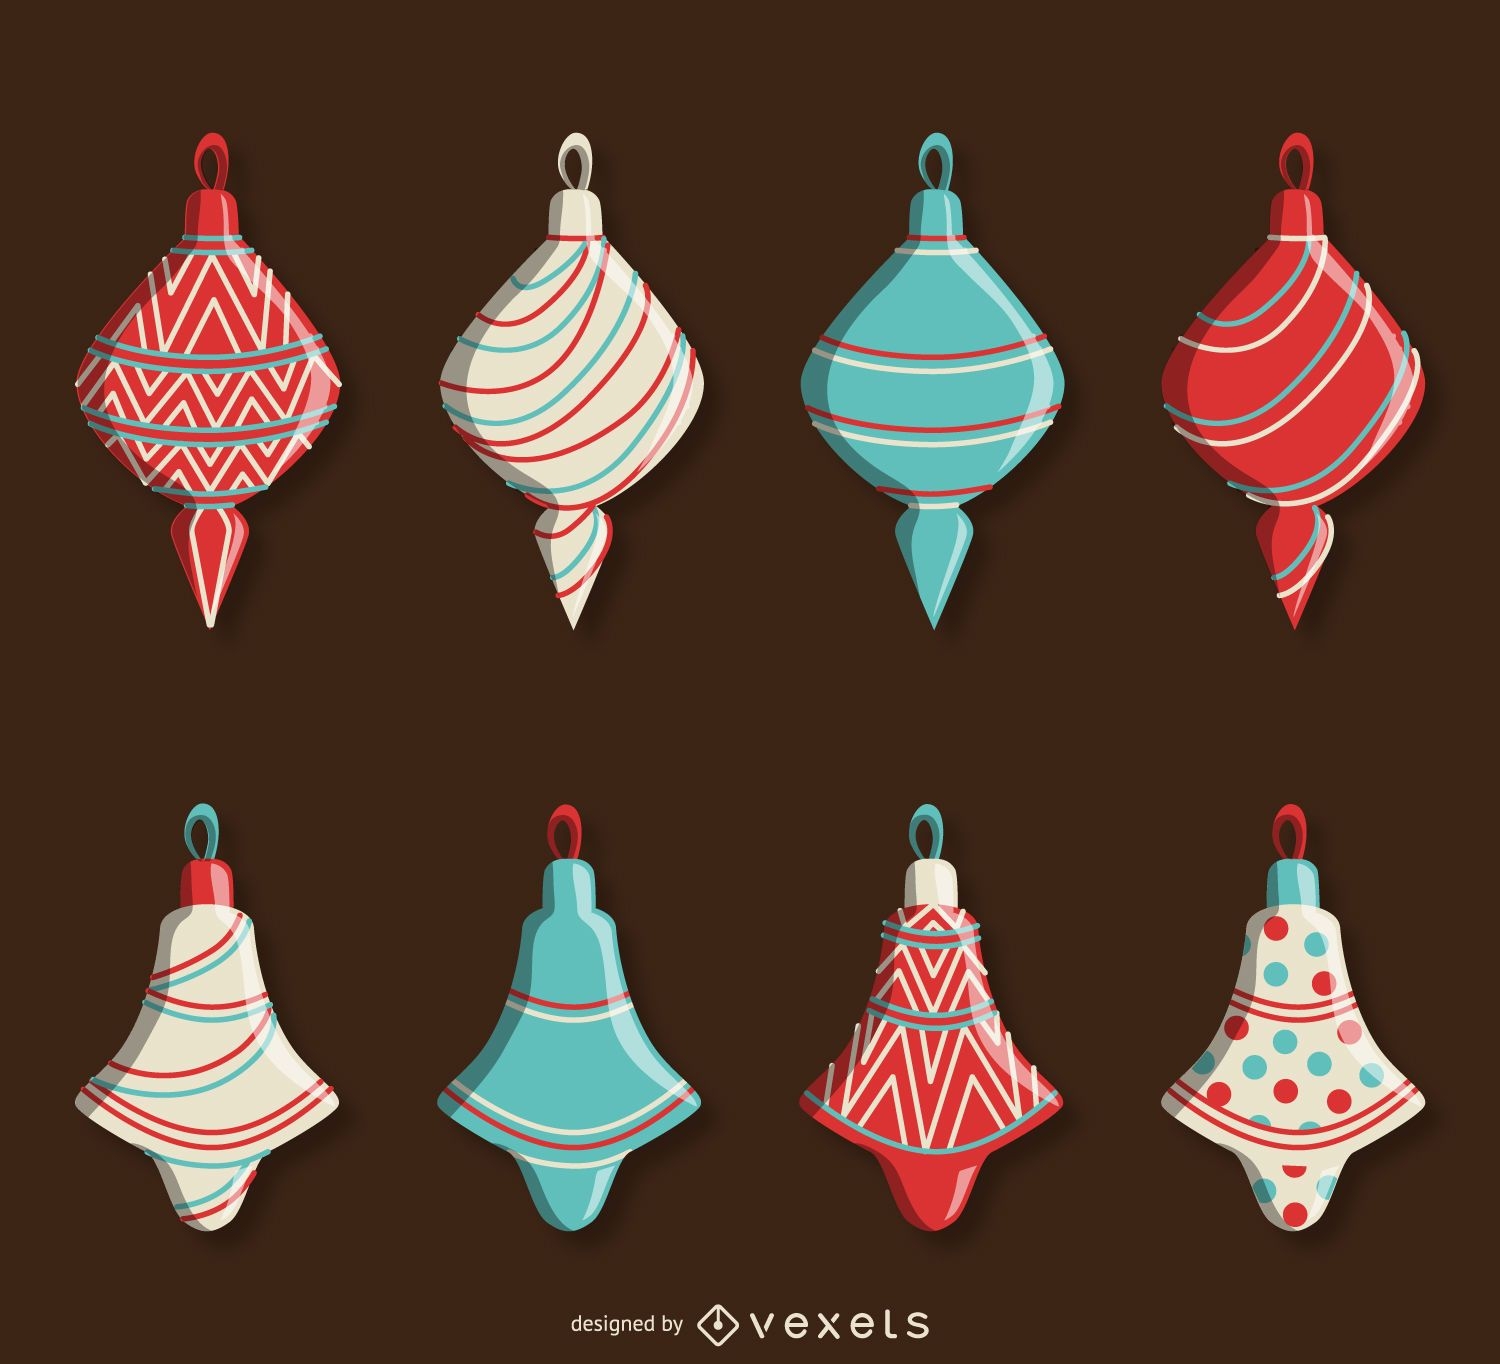 Vintage Christmas decorations pack